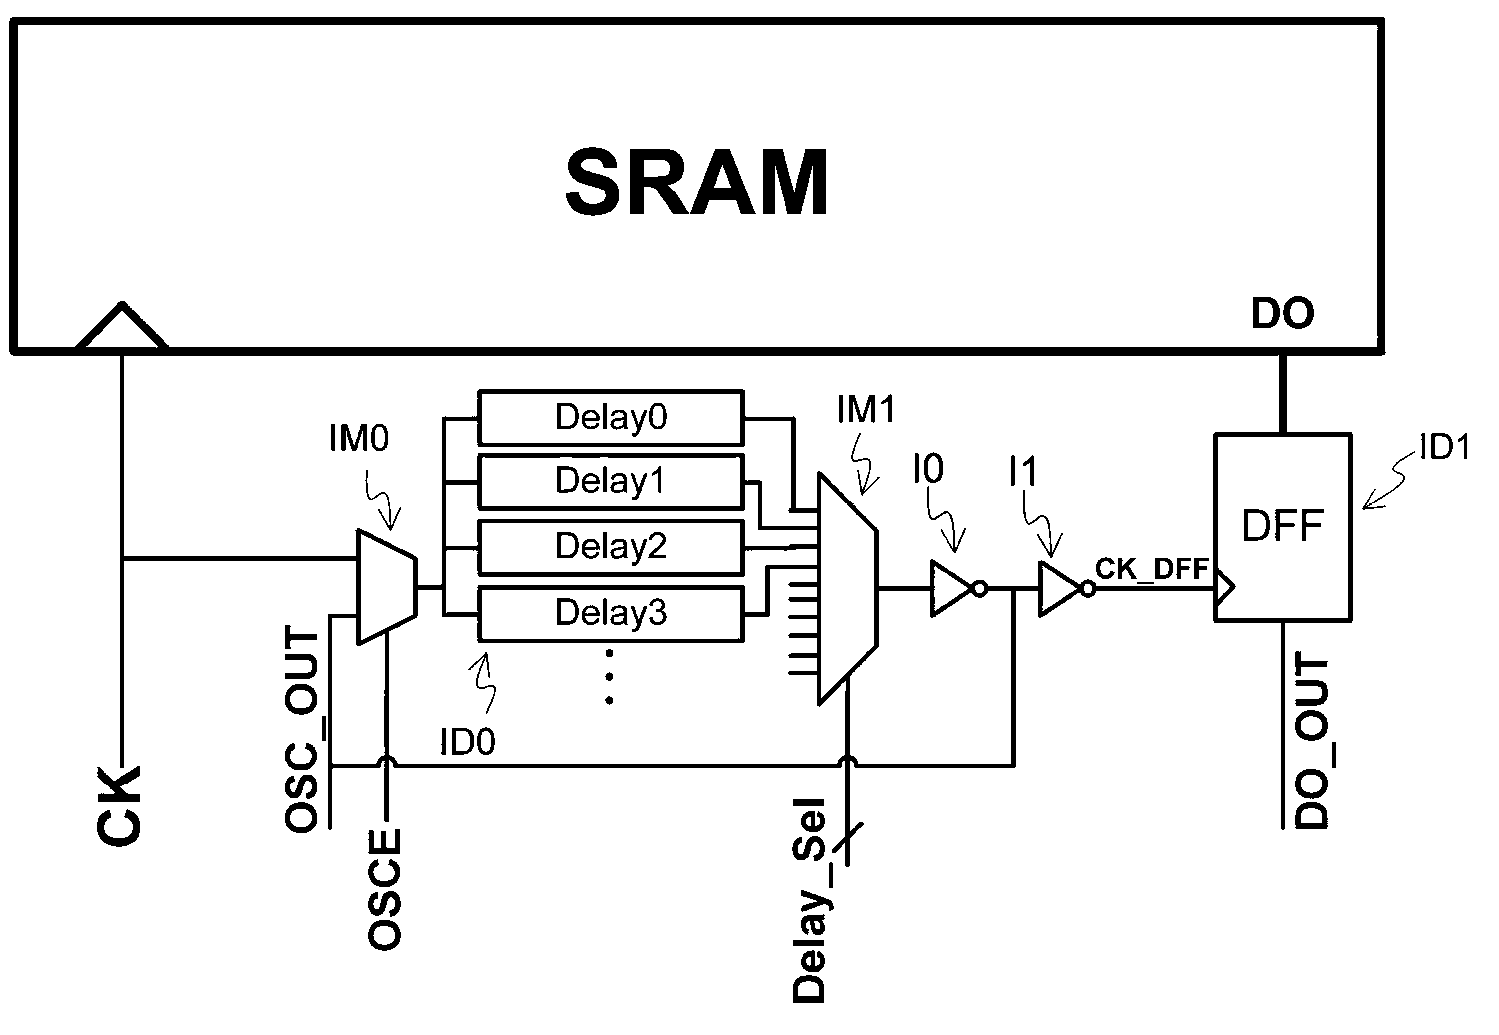 SRAM timing sequence test circuit and test method